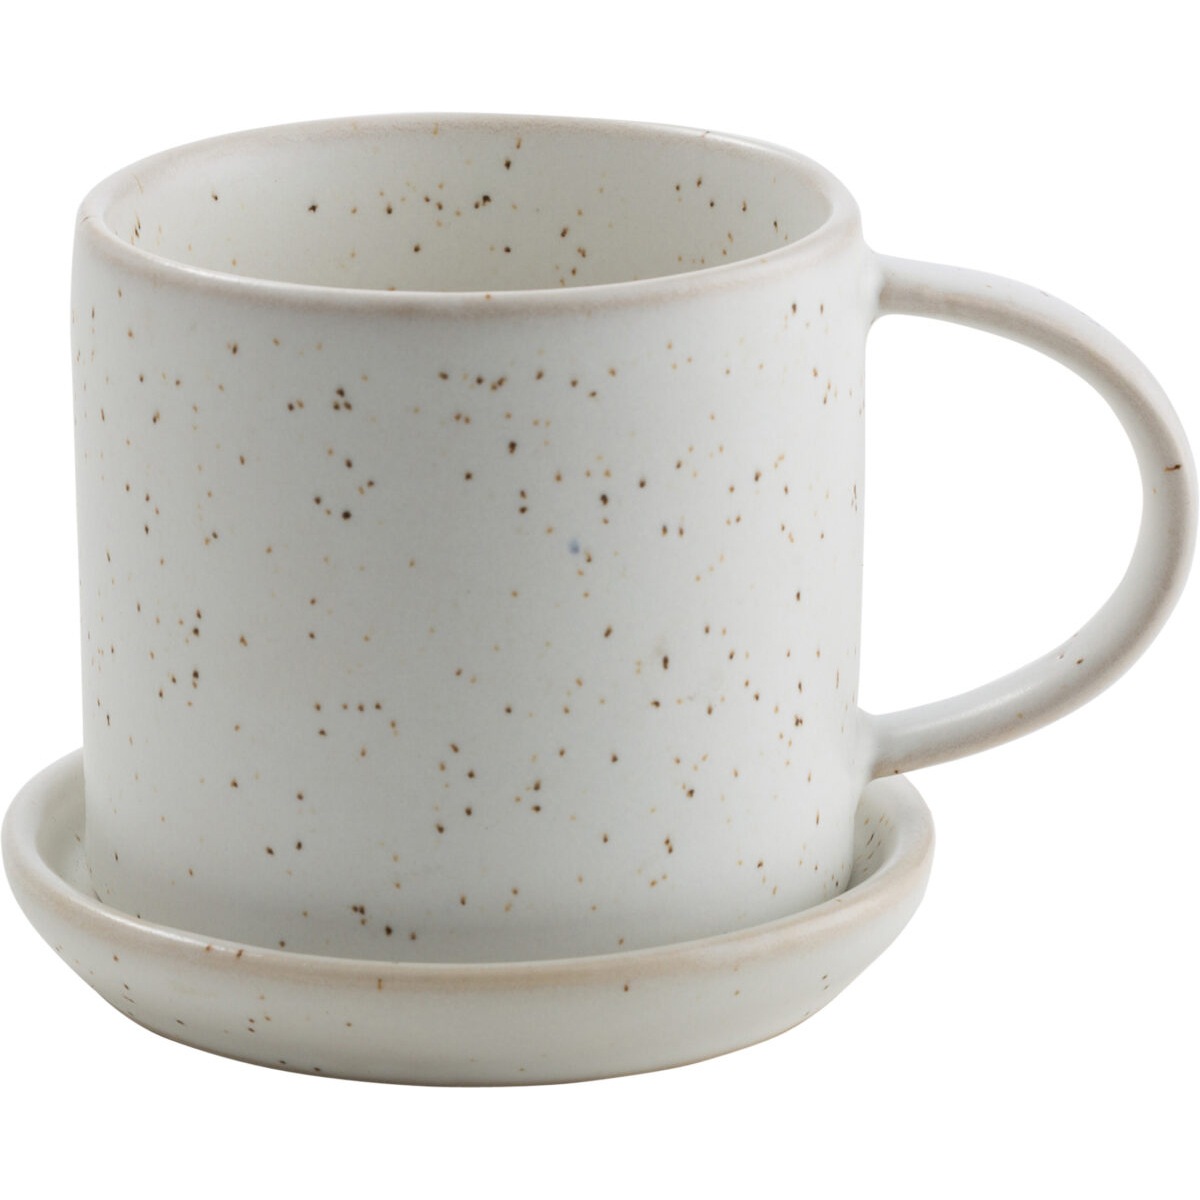 Cup With Saucer 7 cm, White/Spotted